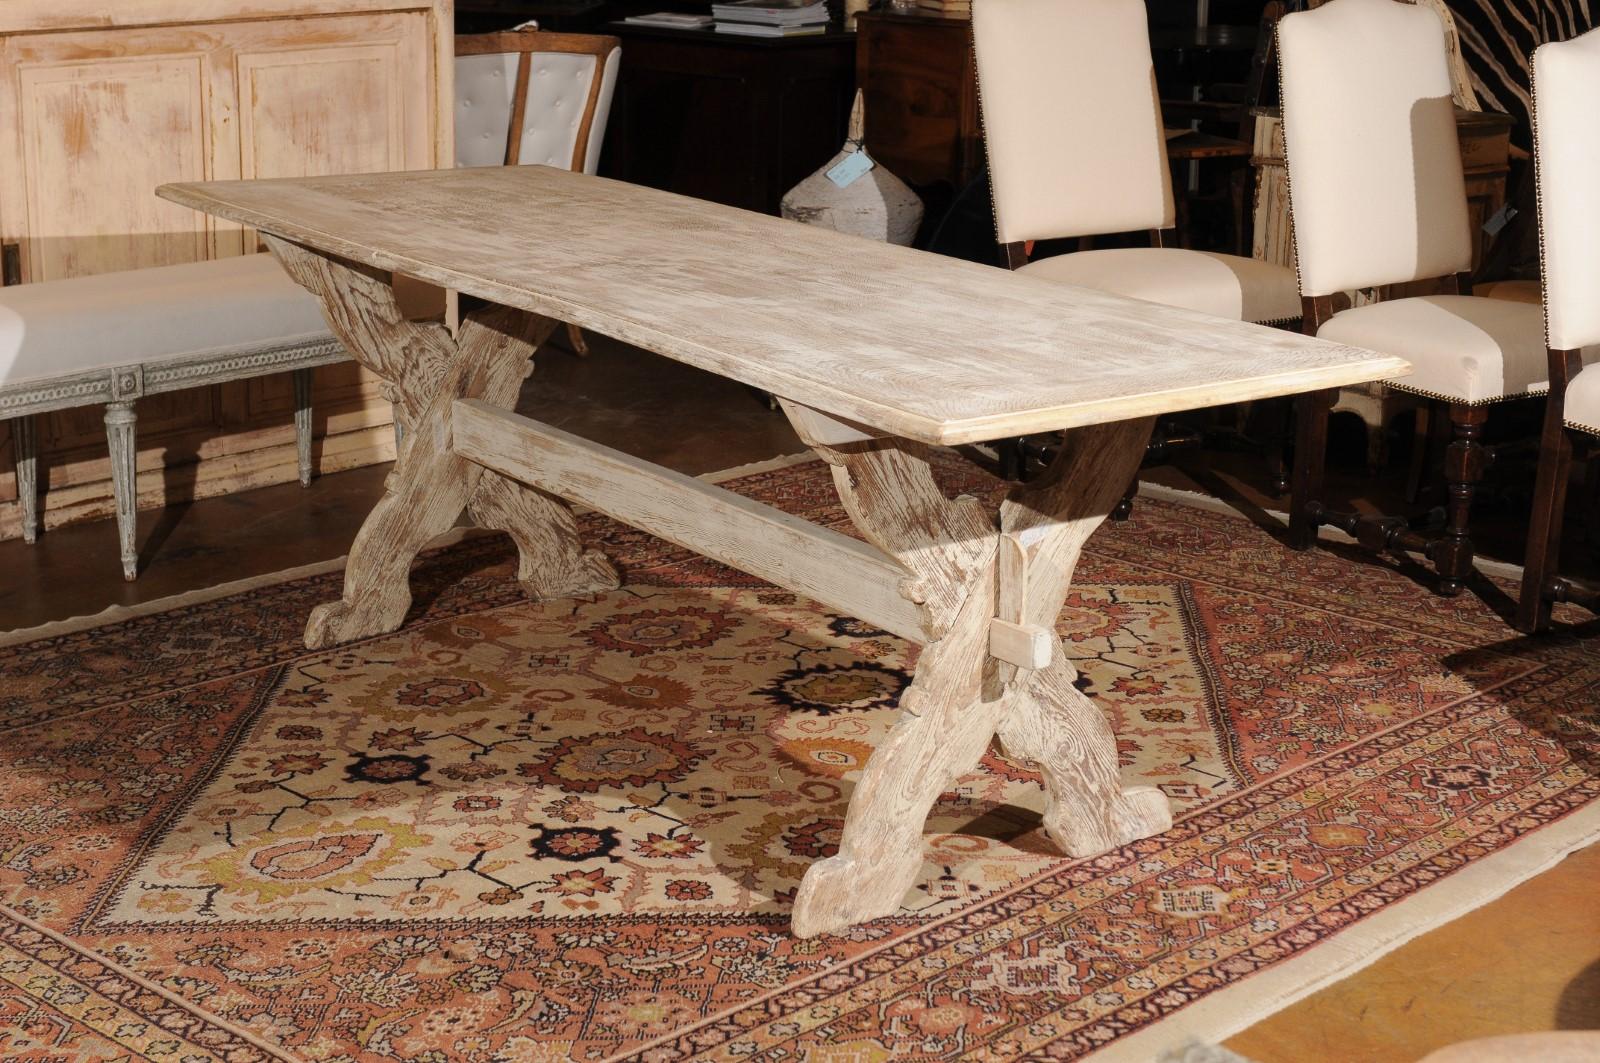 A Swedish painted trestle farm table from the late 19th century, with X-form base and distressed finish. Born in Sweden during the last decade of the 19th century, this charming farm table features a rectangular top sitting above a trestle base made